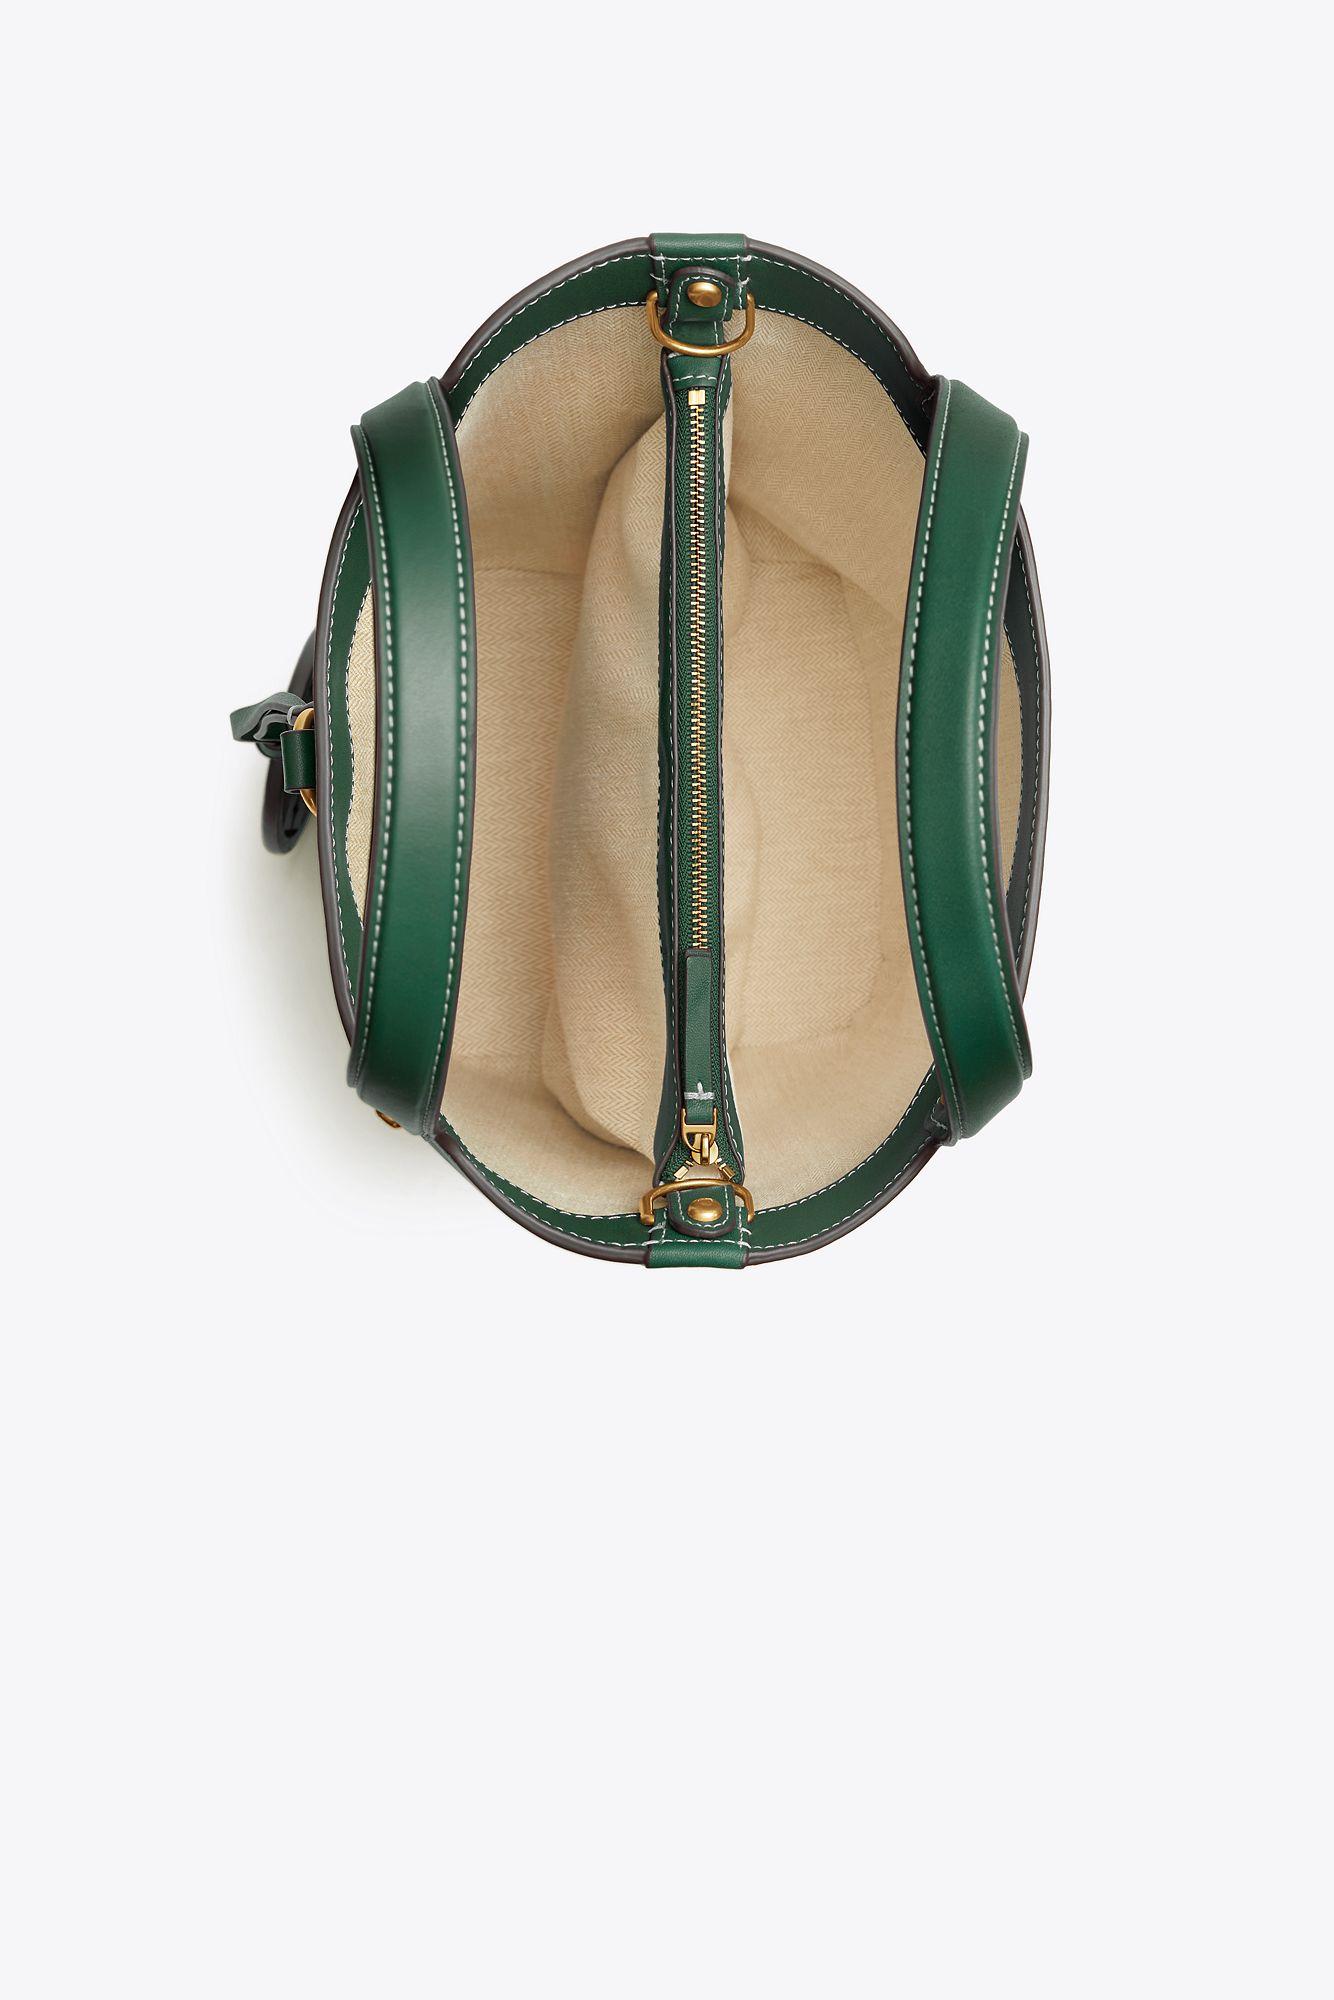 Authentic Tory Burch MALACHITE Green Miller Bucket Bag Tote Crossbody NW  for sale online